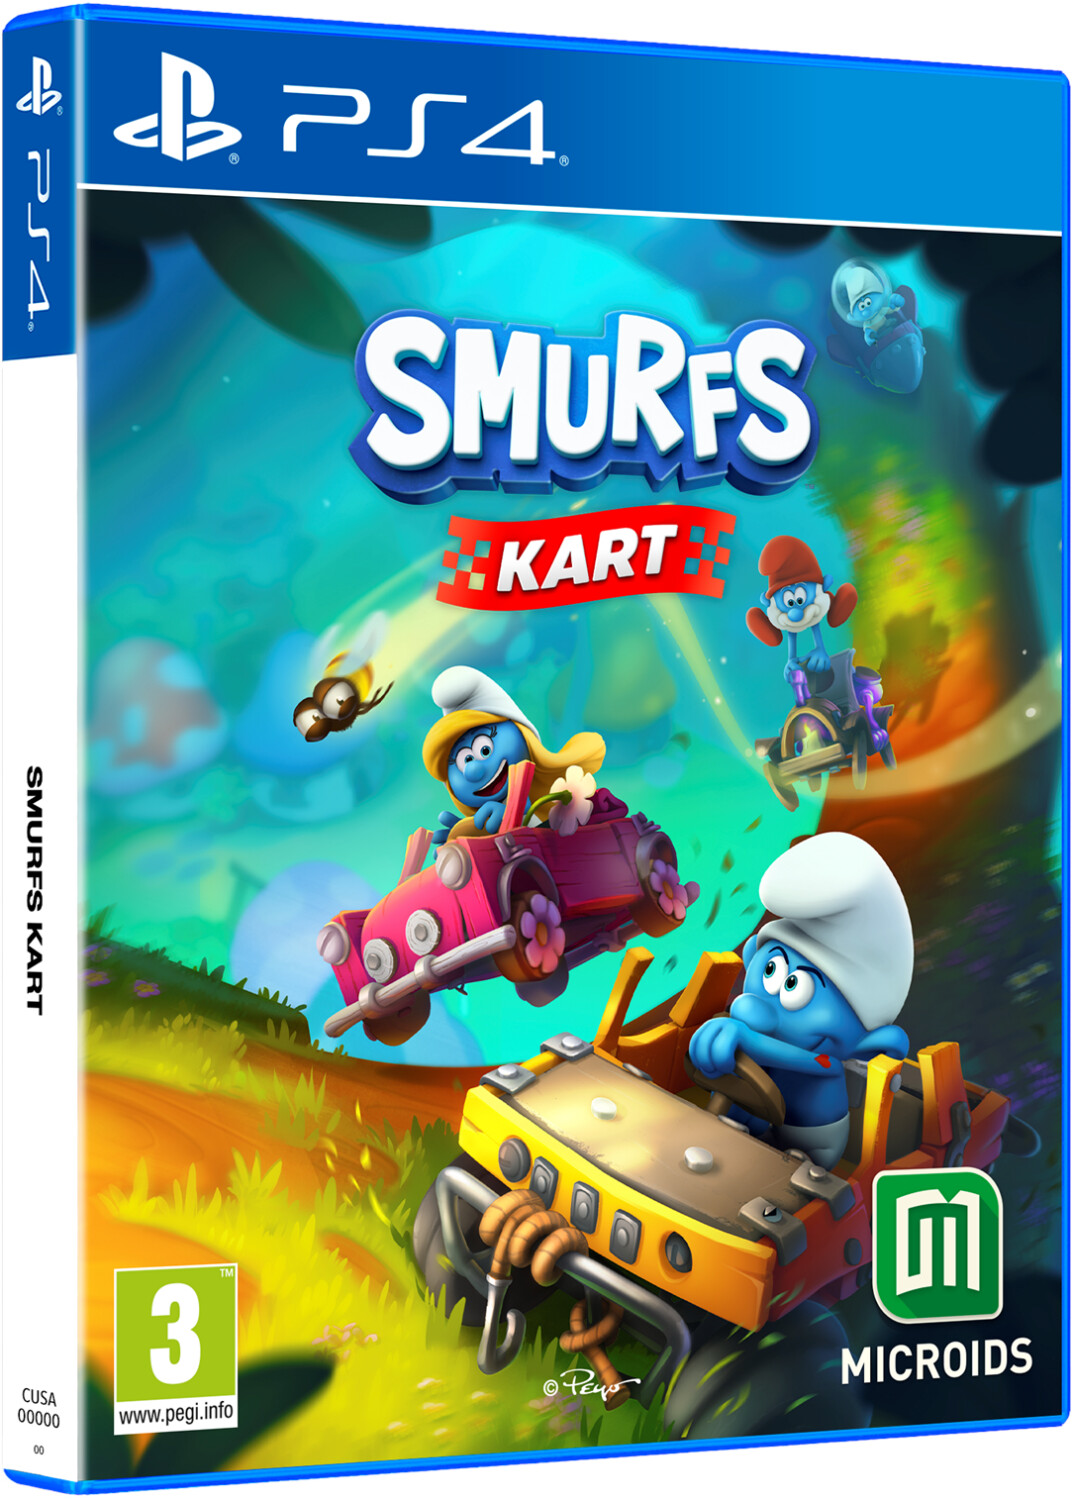 Photos - Game Microids The Smurfs: Kart (PS4)